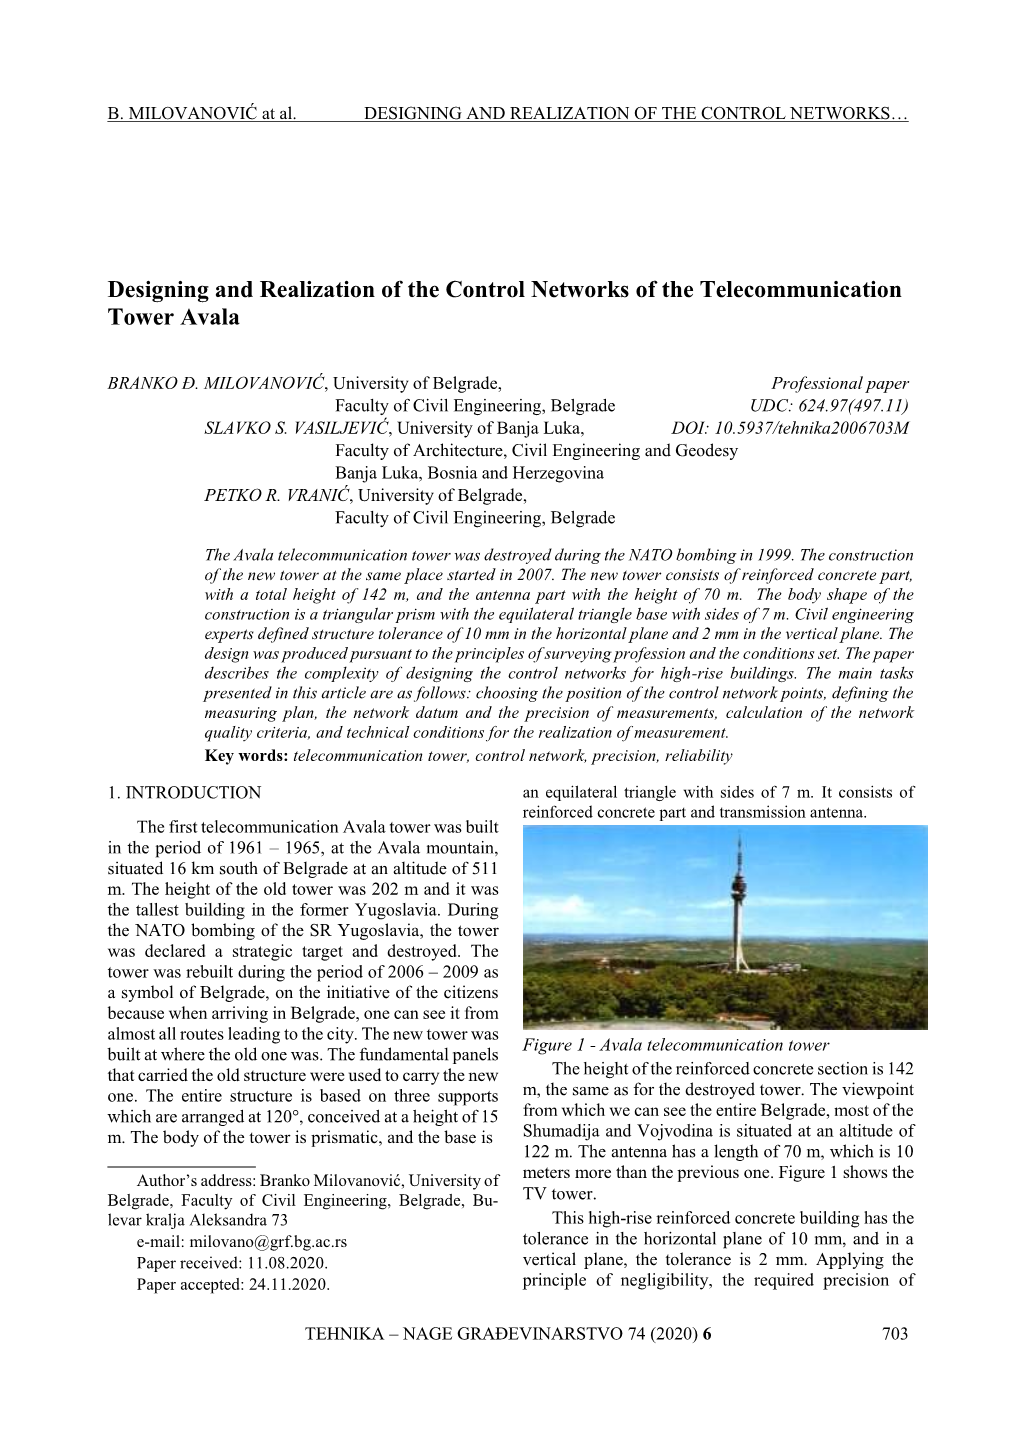 Designing and Realization of the Control Networks of the Telecommunication Tower Avala